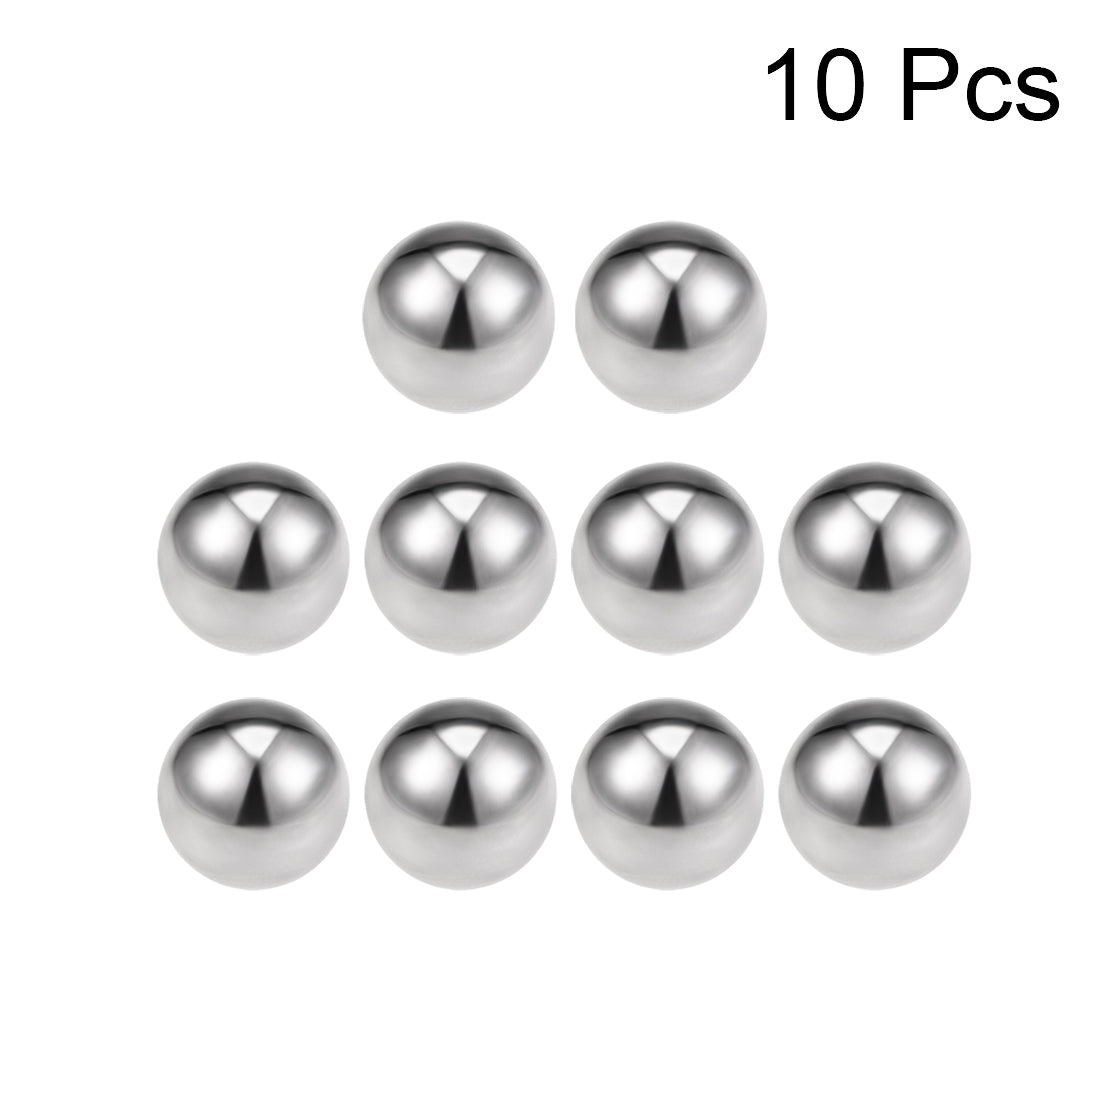 Uxcell Uxcell 5/8" Bearing Balls 316L Stainless Steel G100 Precision Balls 10pcs